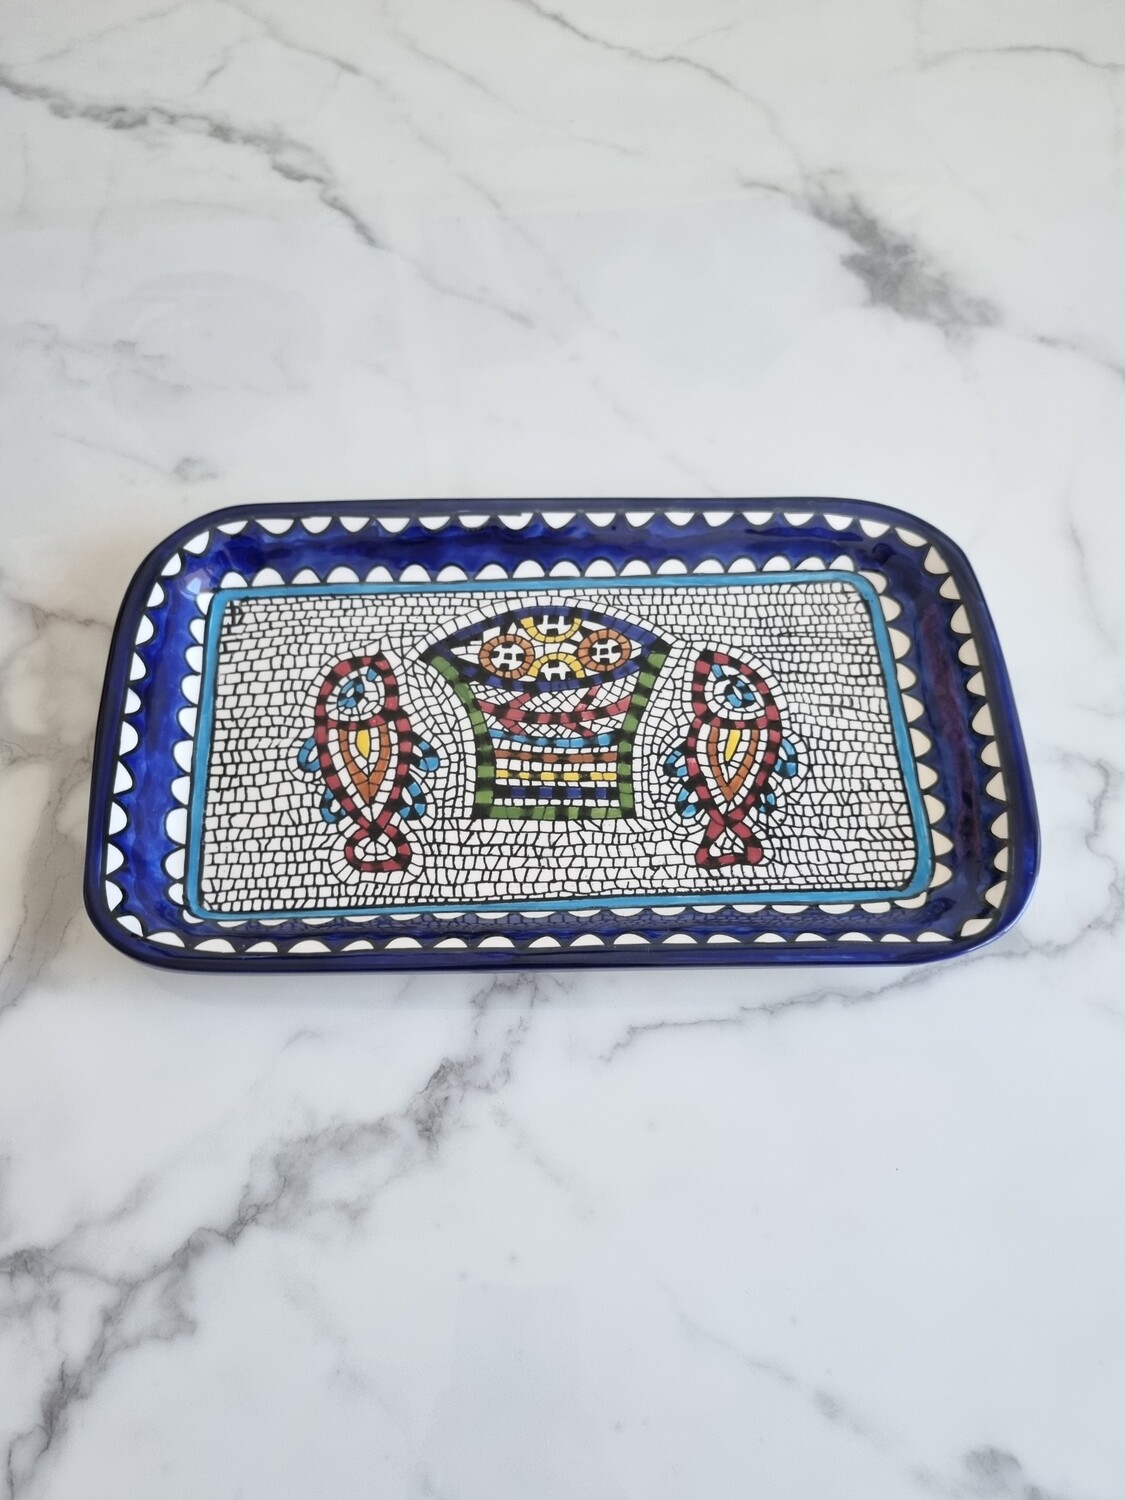 Loaves and Fishes (Tabgha) Tray